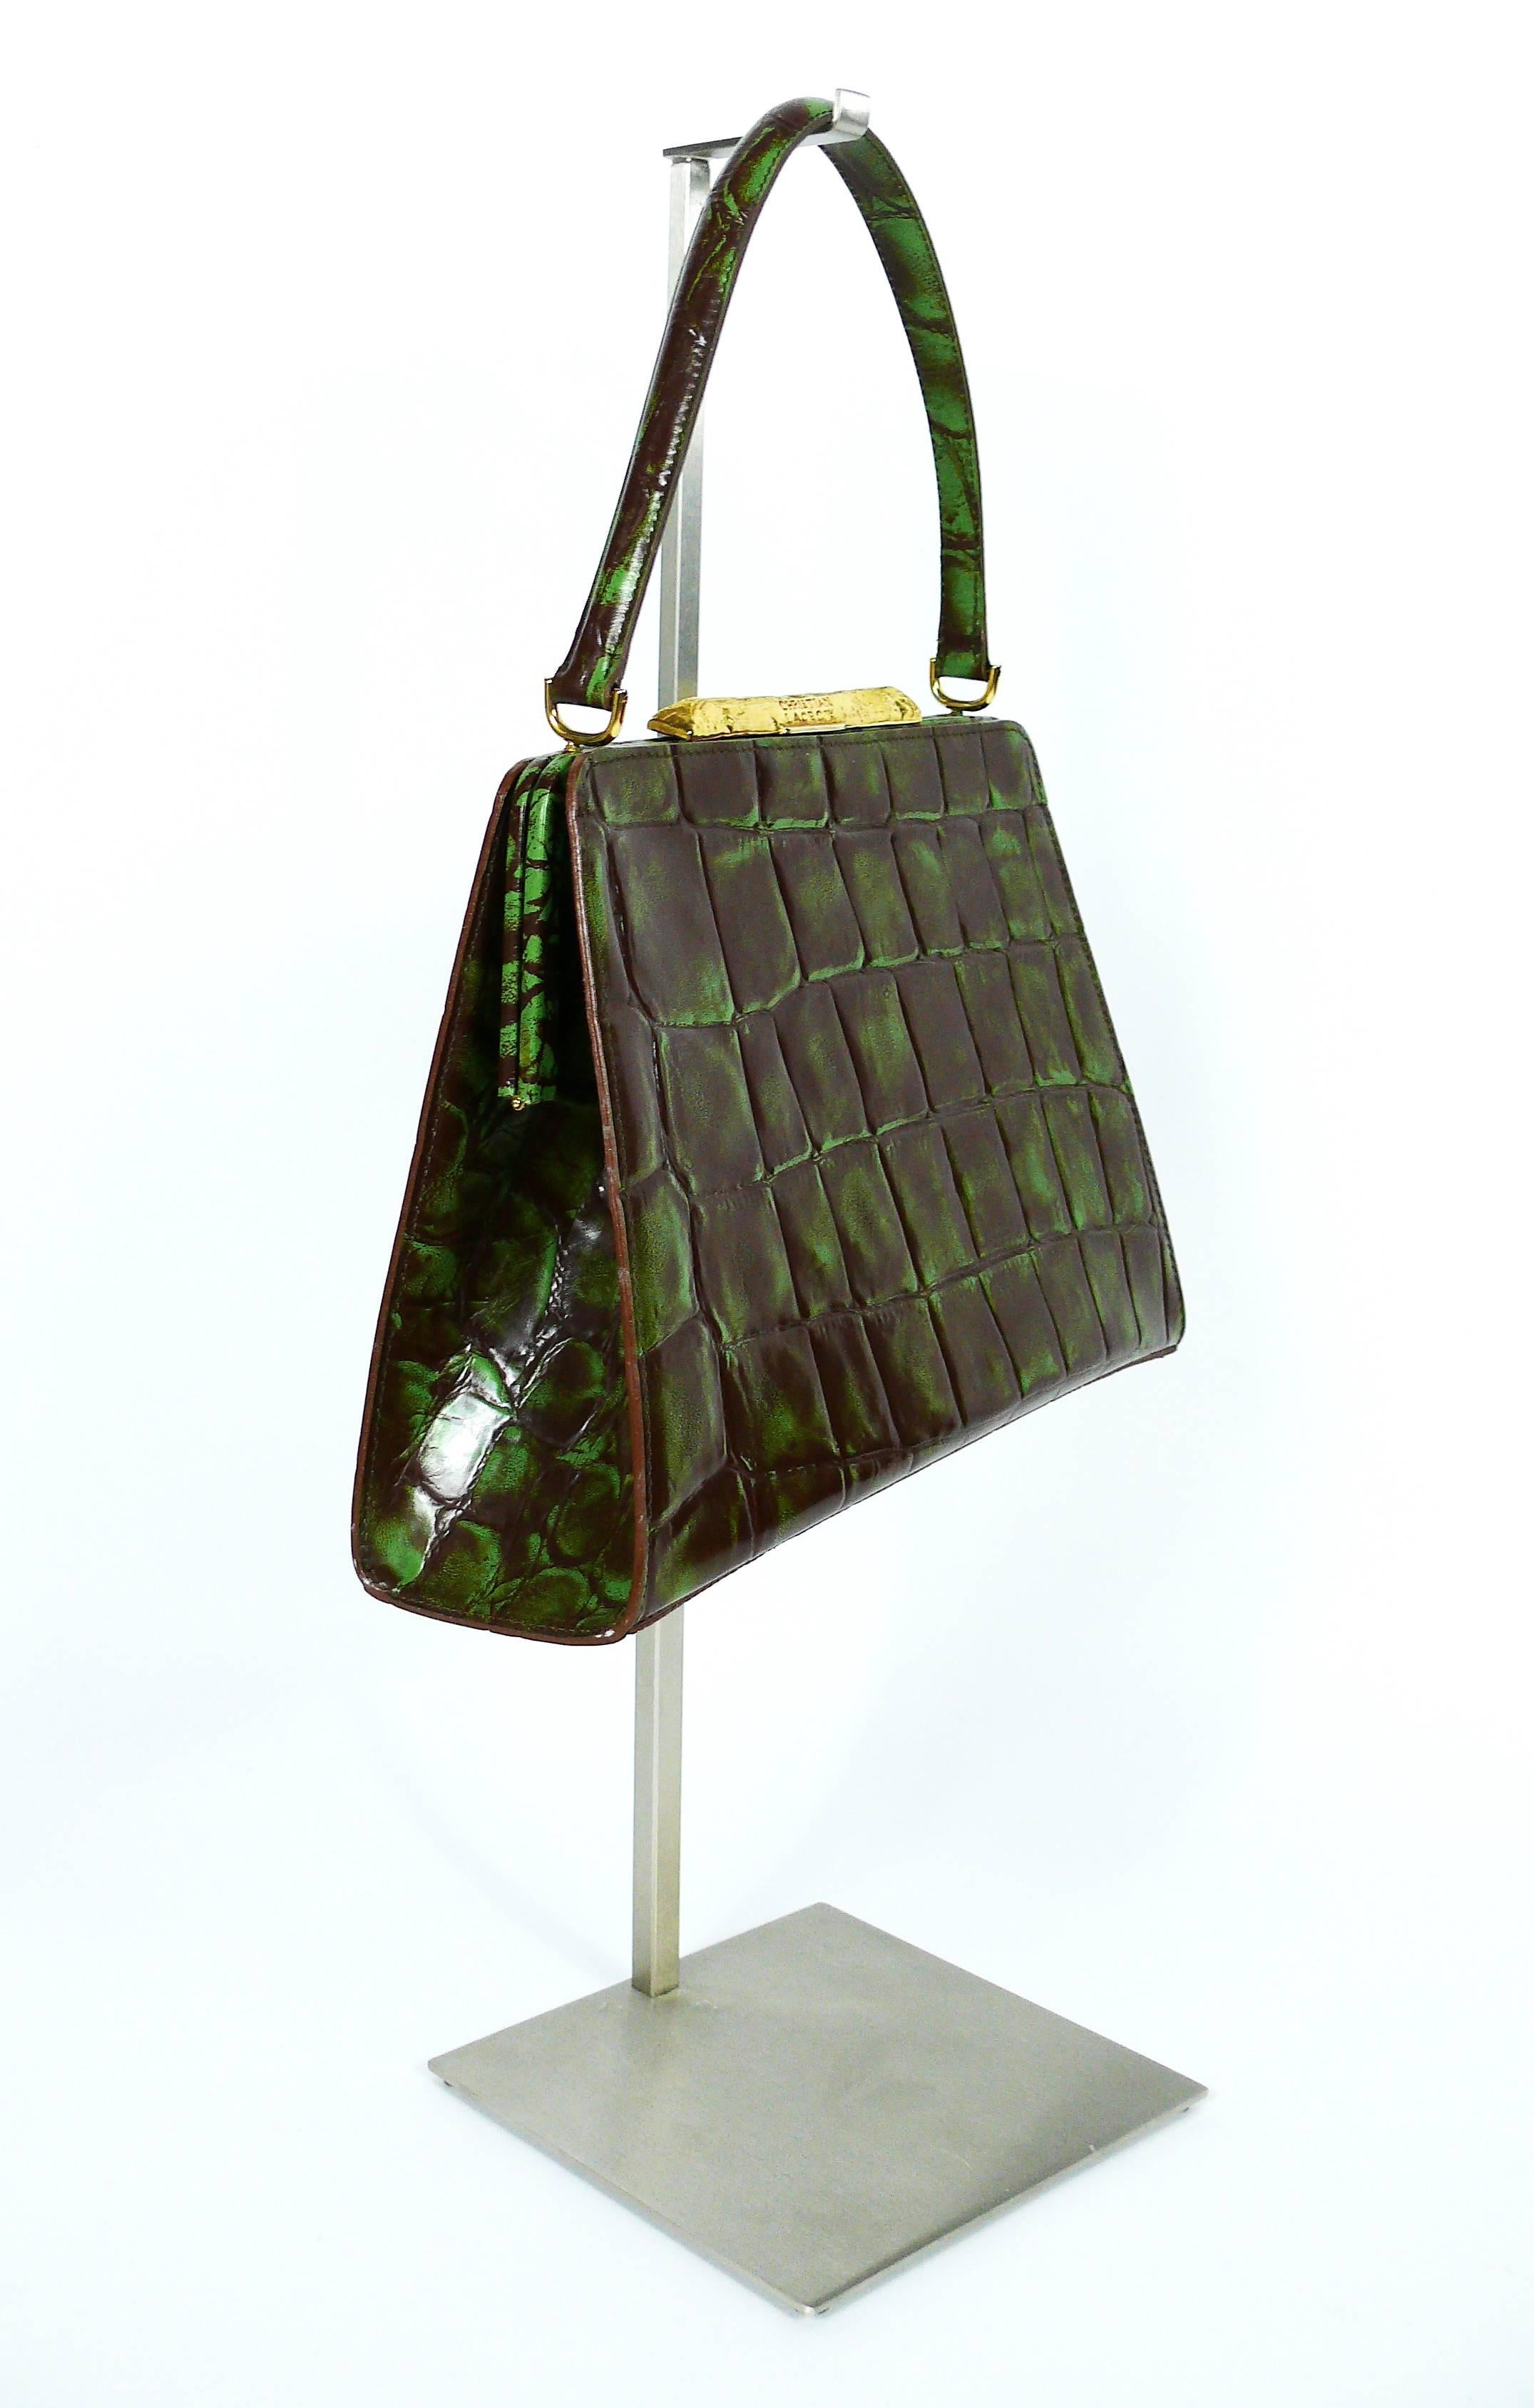 CHRISTIAN LACROIX vintage rare faux leather croc embossed framed handbag in vibrant green and brown colors.

This bag features :
- Gold toned hardware.
- Gorgeous gold toned textured clasp embossed CHRISTIAN LACROIX CL.
- Yellow canvas